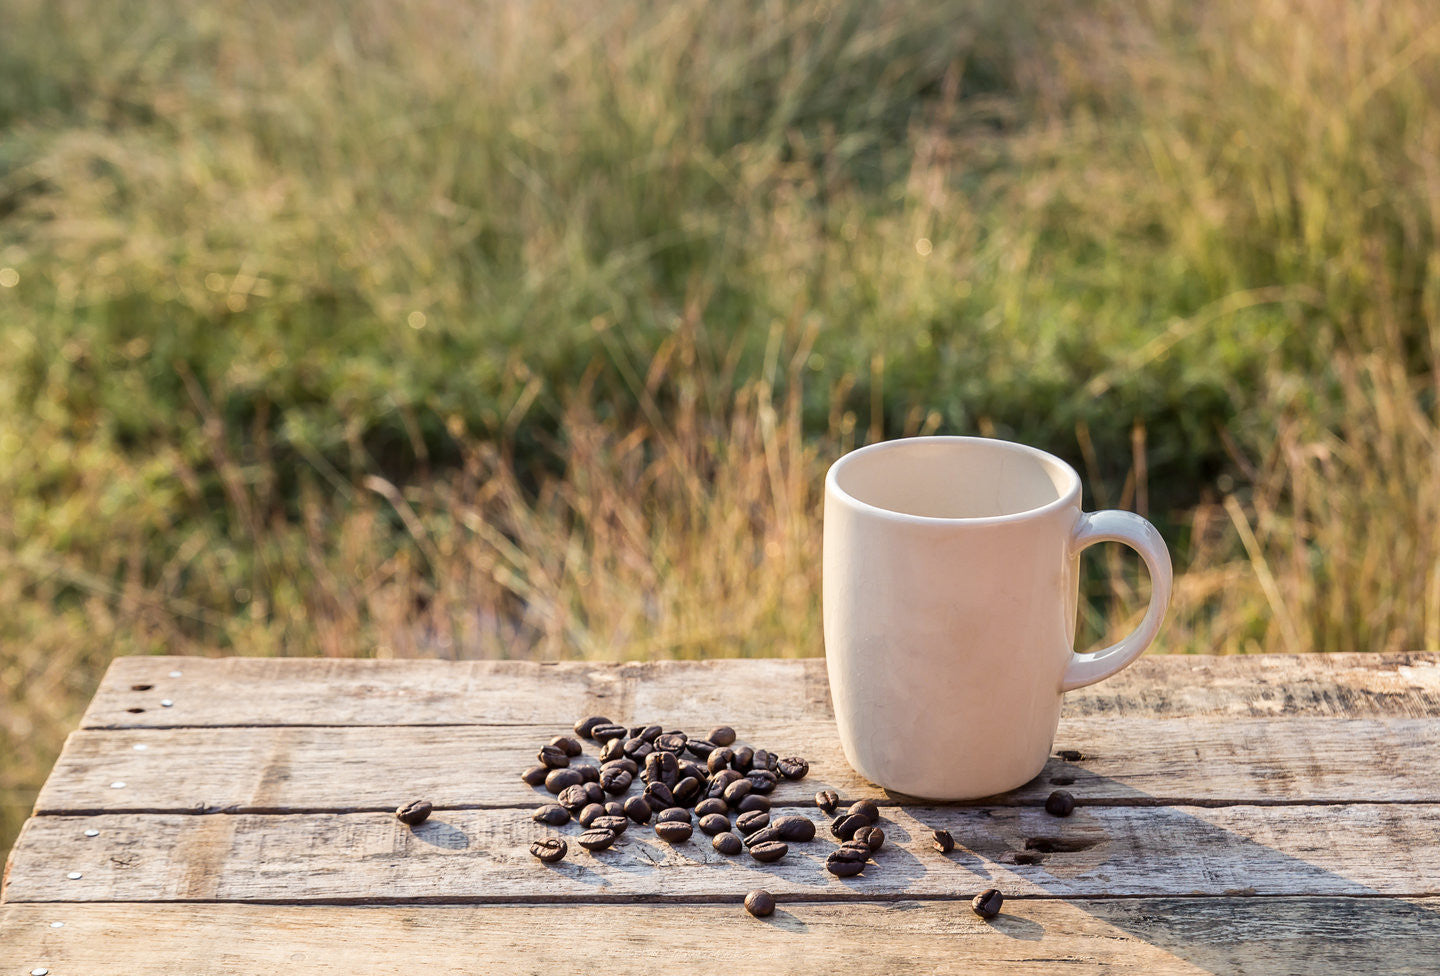 What’s the best coffee to enjoy in the summer months?